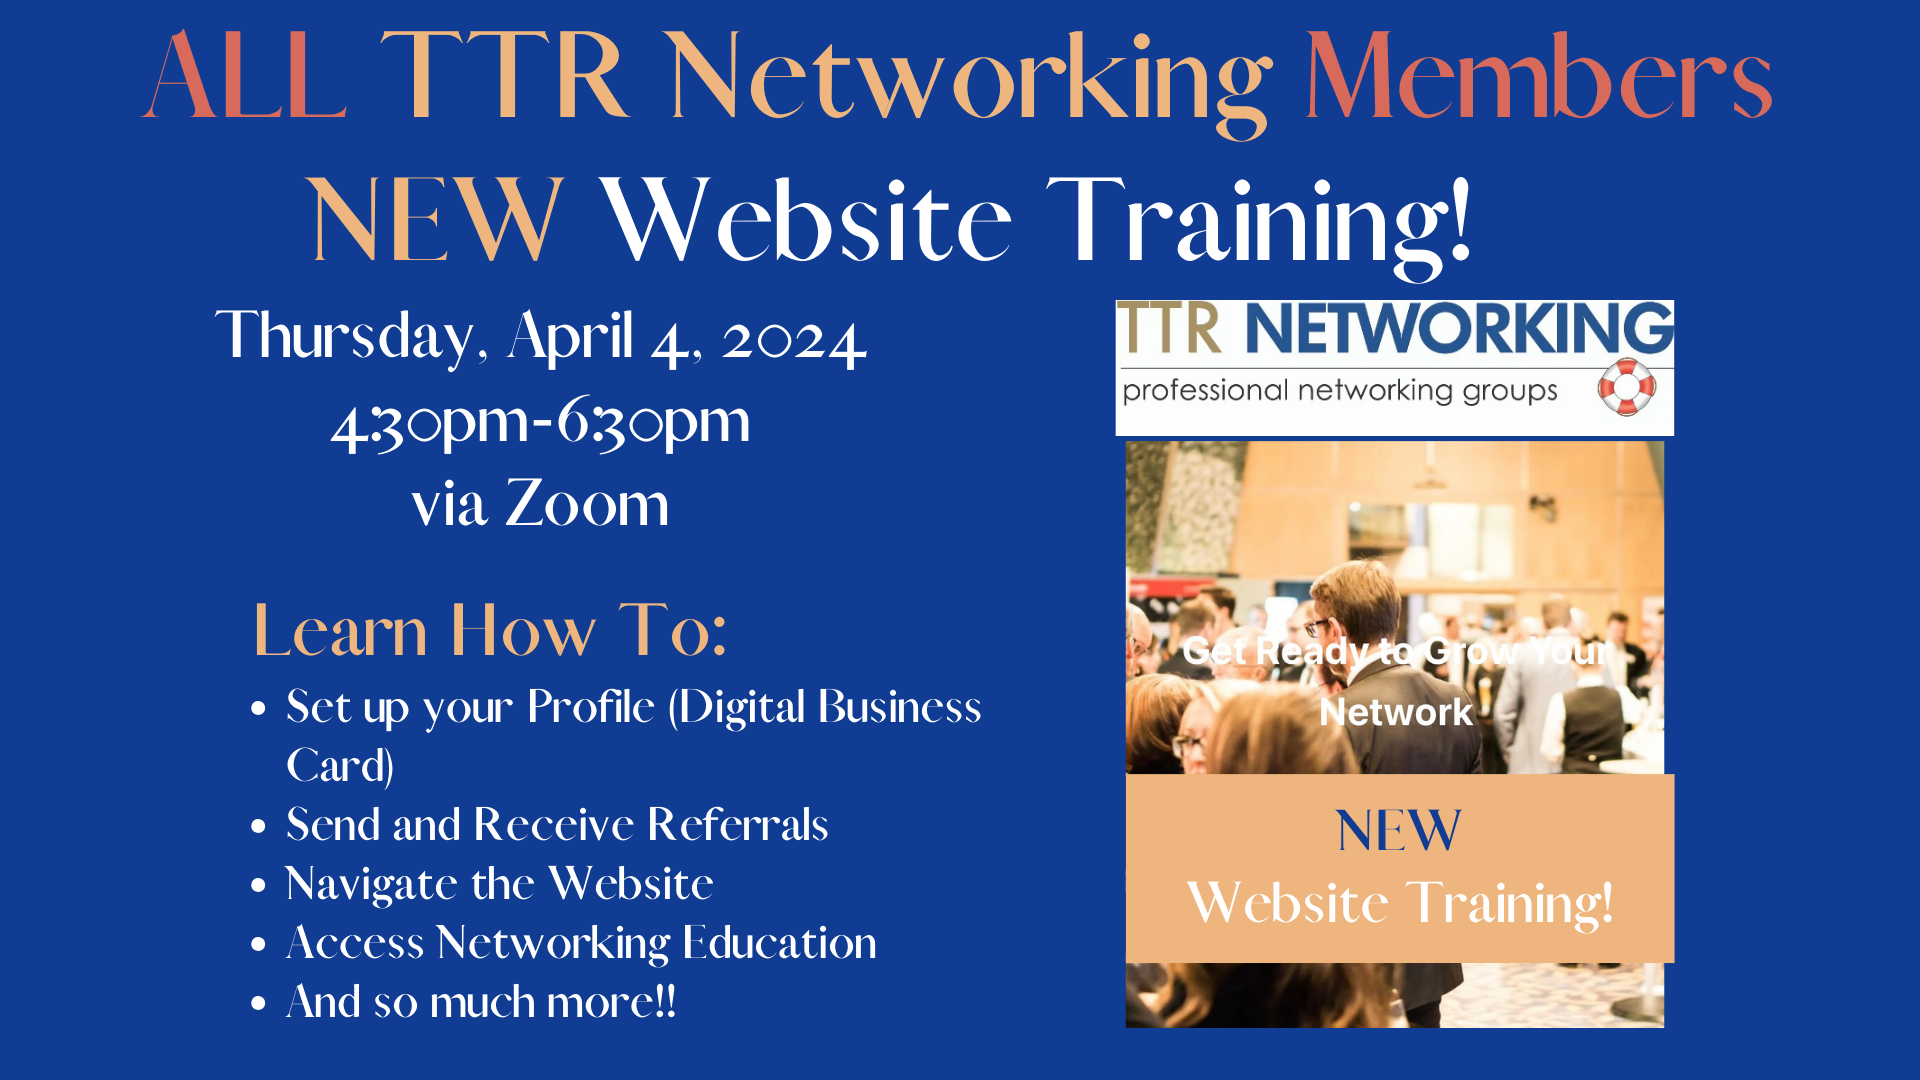 TTR Networking Members New Website Training- April 4, 2024- 4:30 pm Eastern on Zoom!